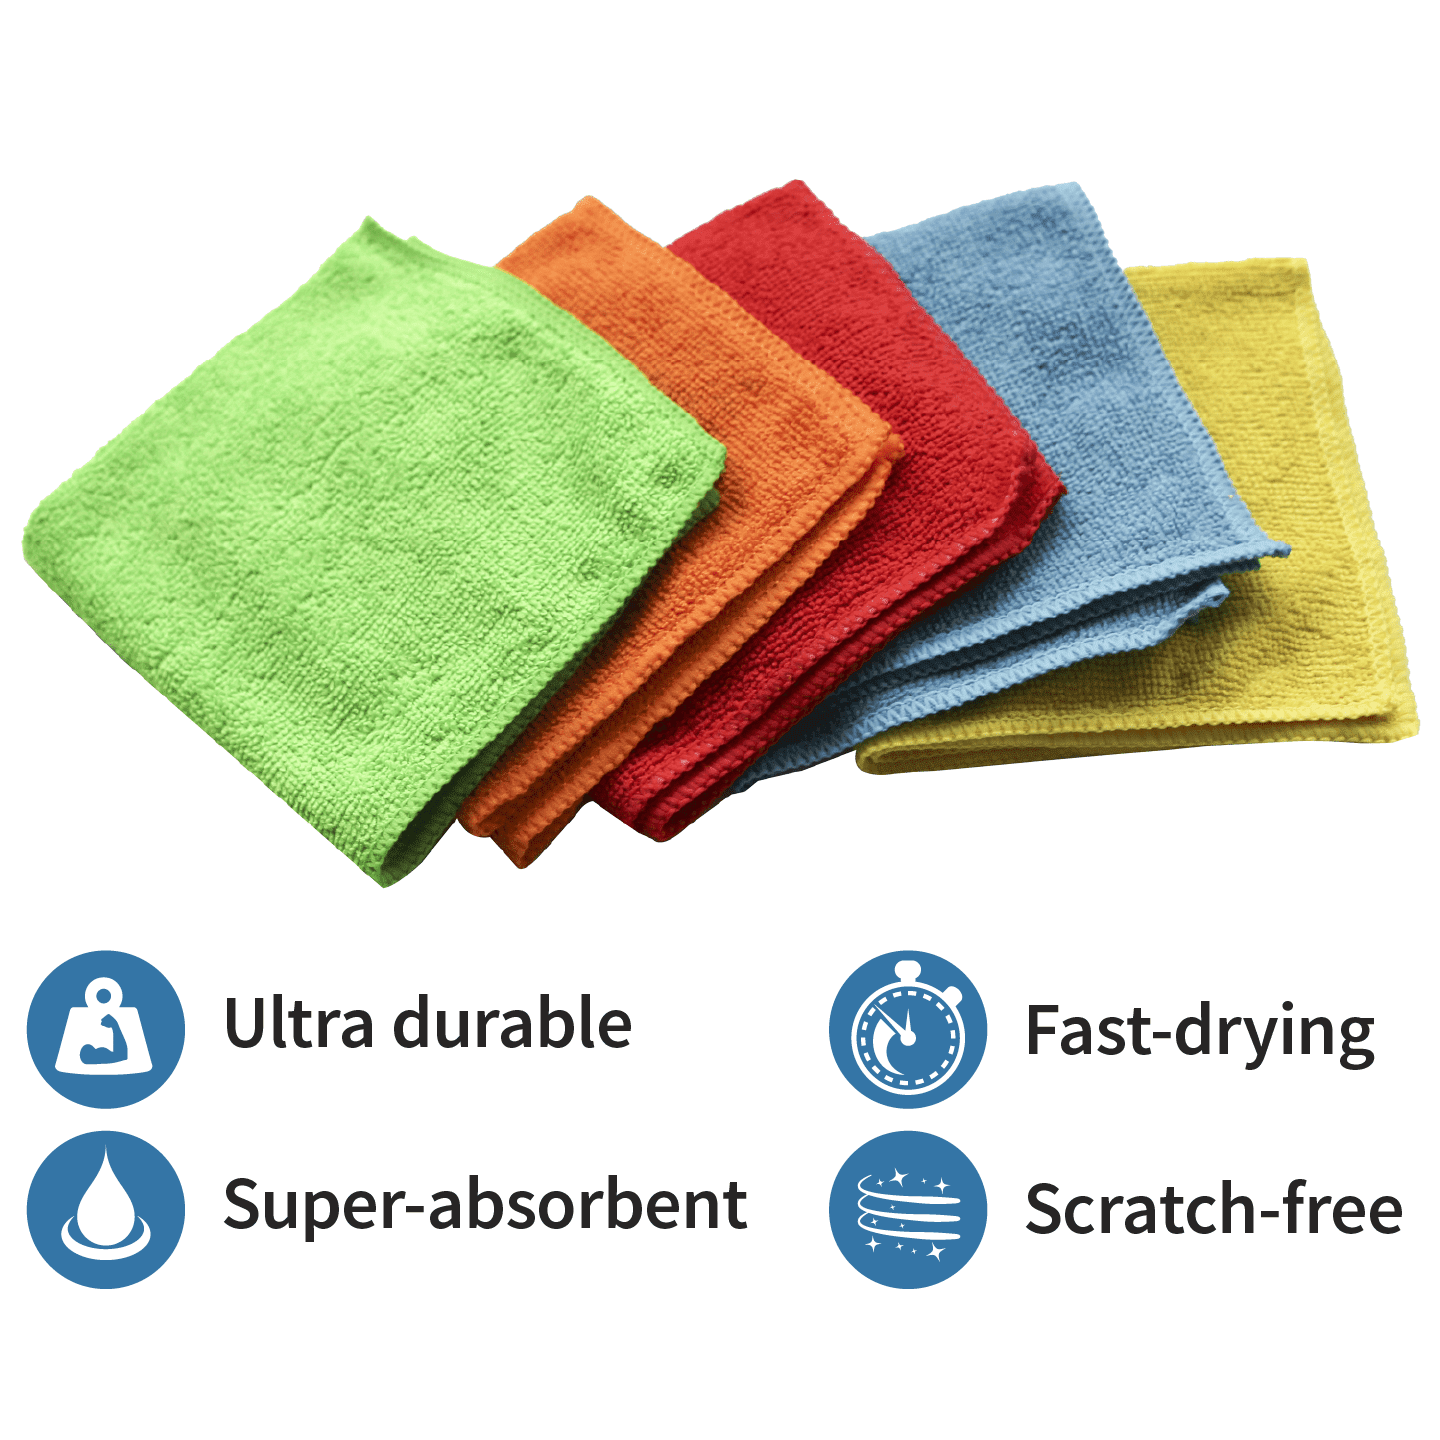 Restaurantware Clean Tek 16 x 16 inch Cleaning Cloths, 100 Lint Free Microfiber Towels - Highly Absorbent, Non Abrasive, Gray Microfiber Cleaning